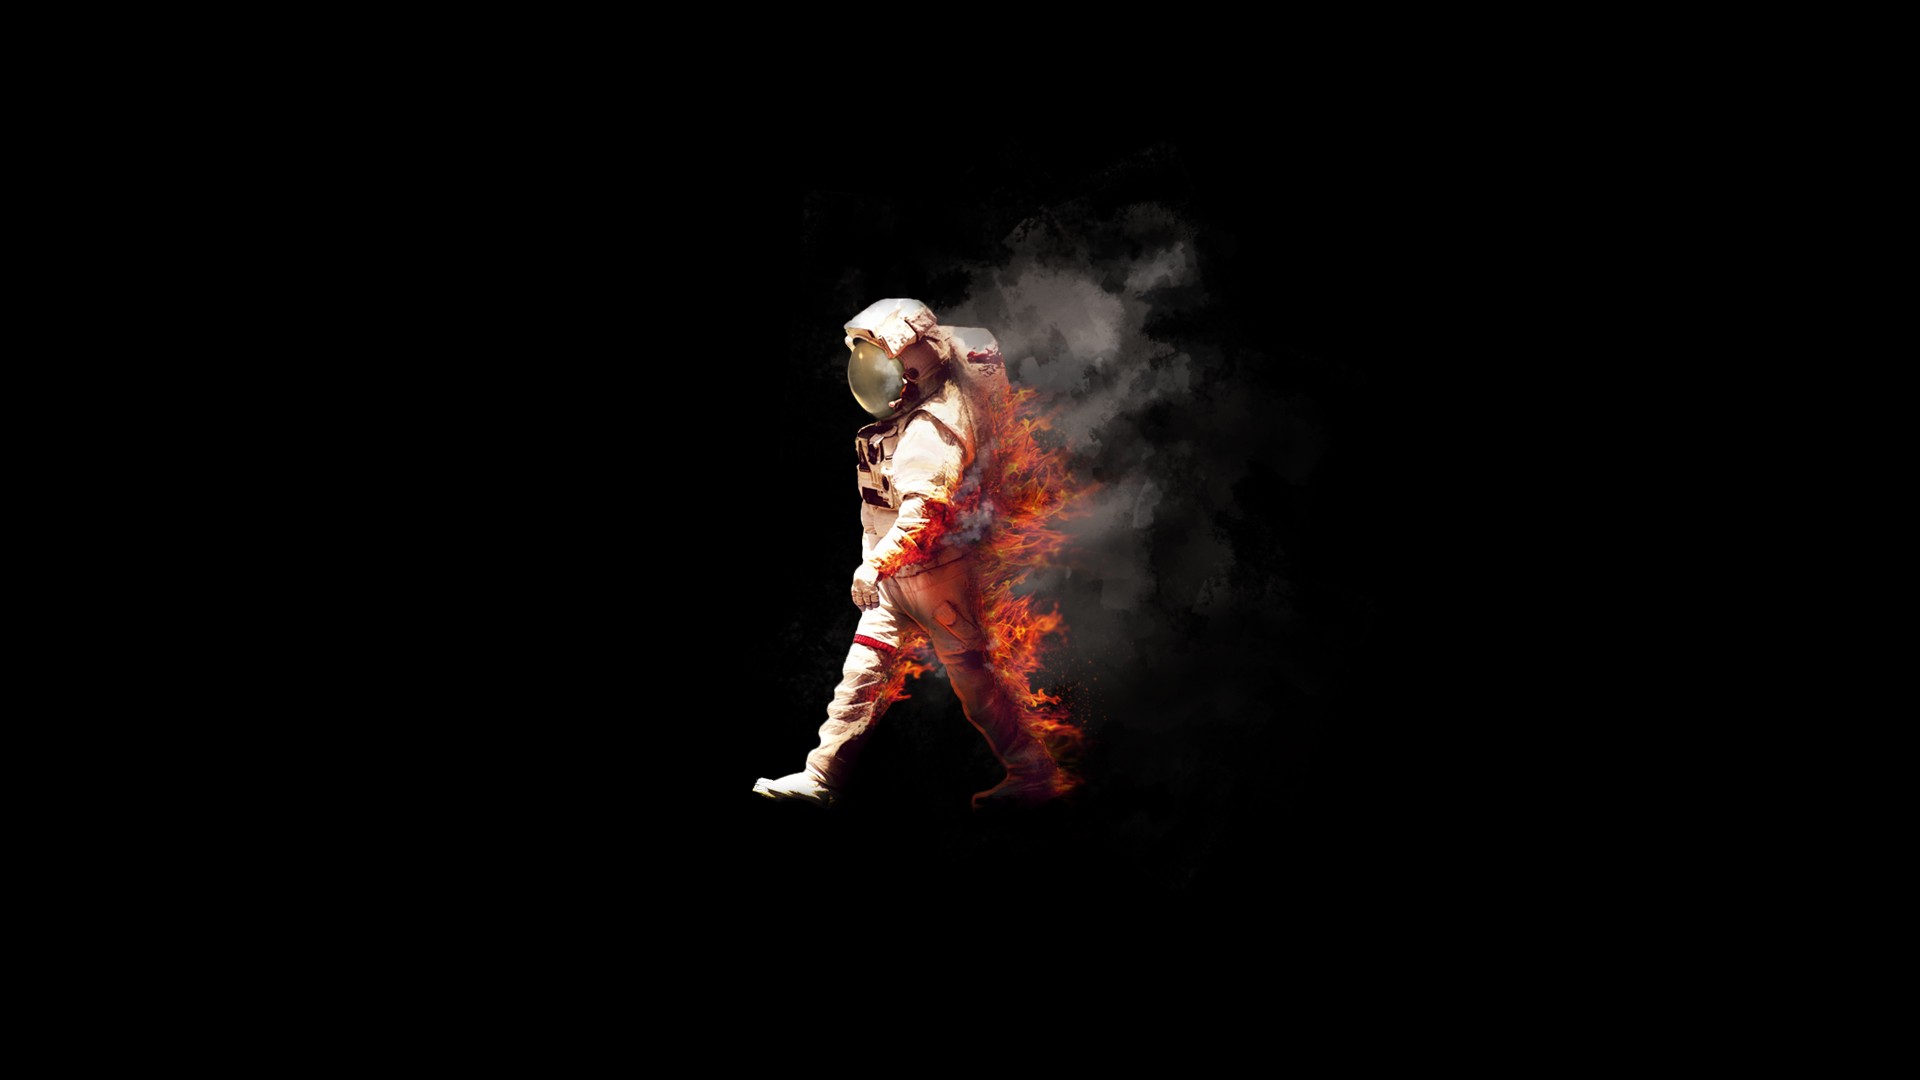 General 1920x1080 astronaut space fire burn spacesuit NASA minimalism abstract burning